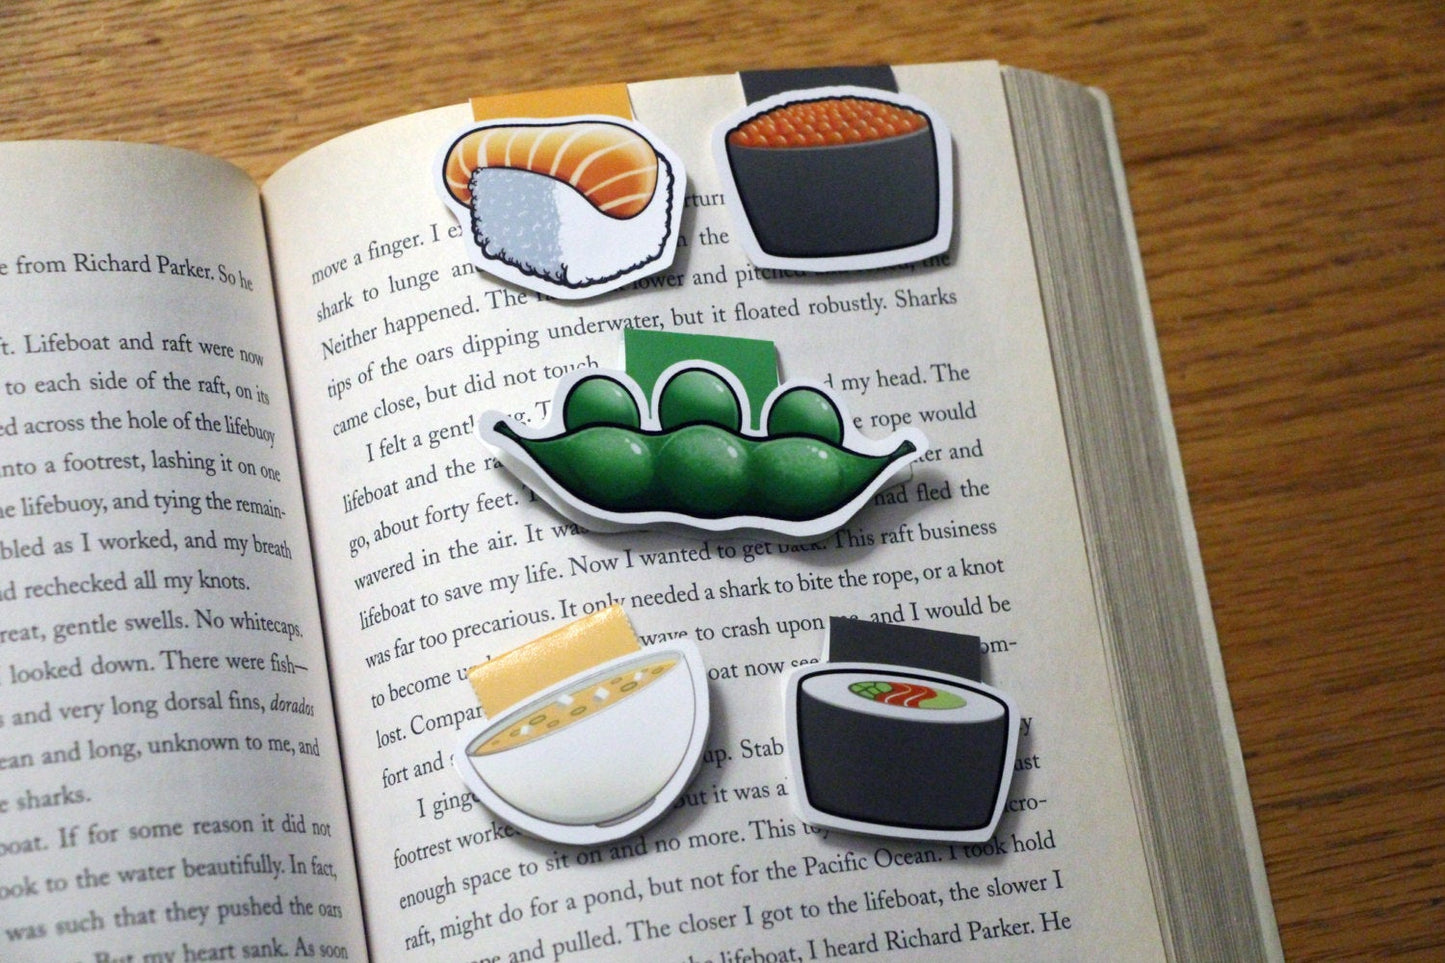 Japanese Foods Magnetic Bookmarks (Set of 5)